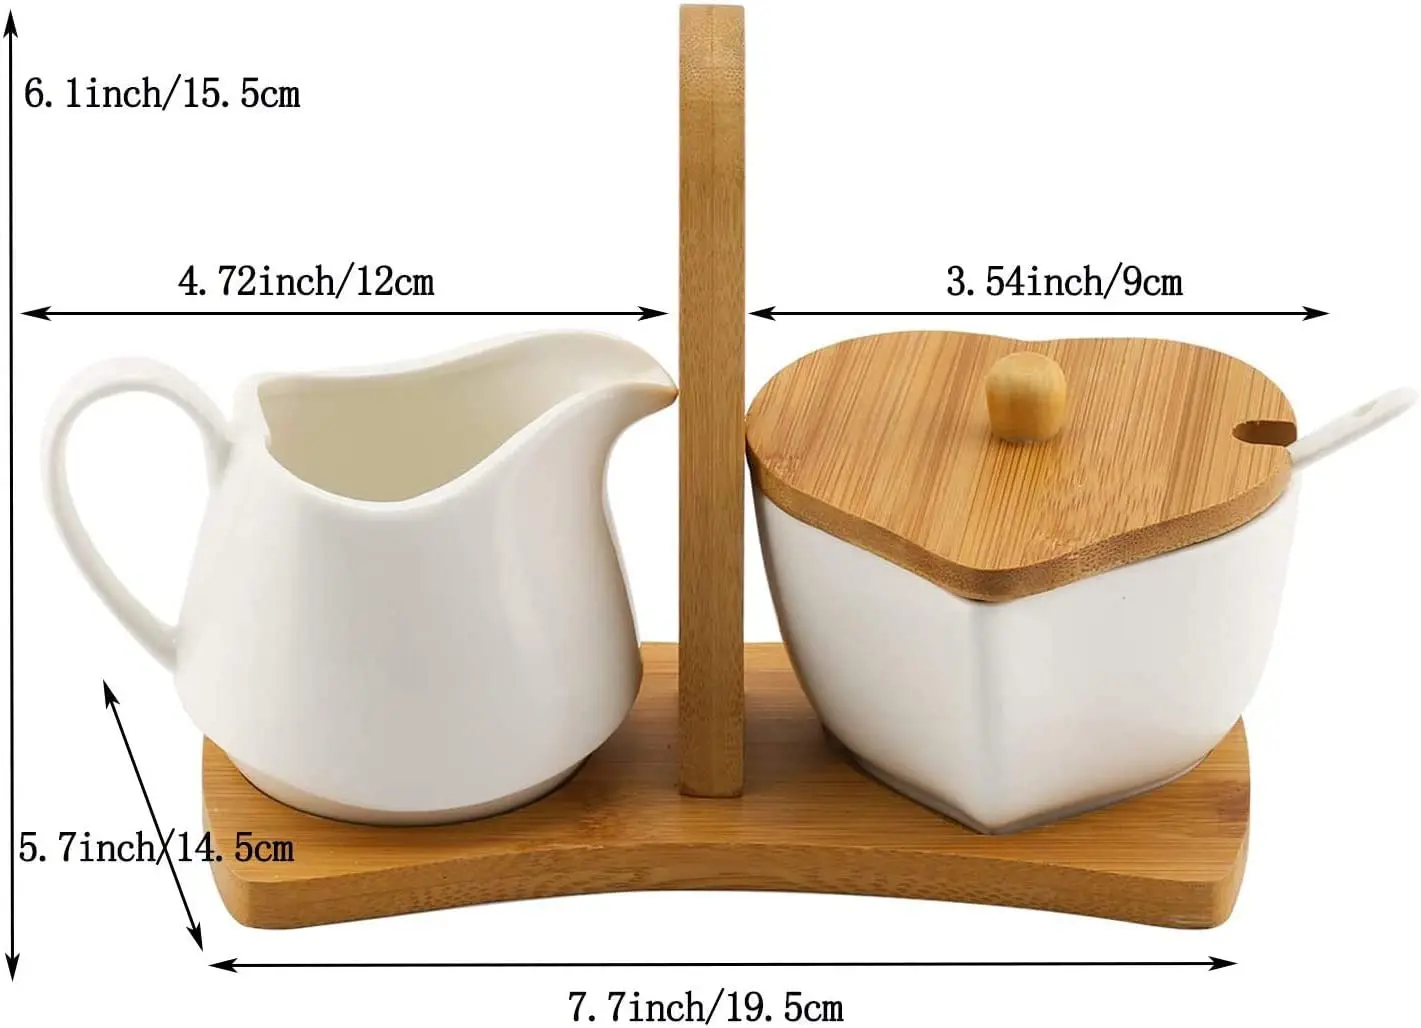 White Tea DOWAN Sugar and Creamer Sets for Coffee 3 Piece Set with Sugar Bowl Spoon Cream Pitcher Ceramic Set with Lid 